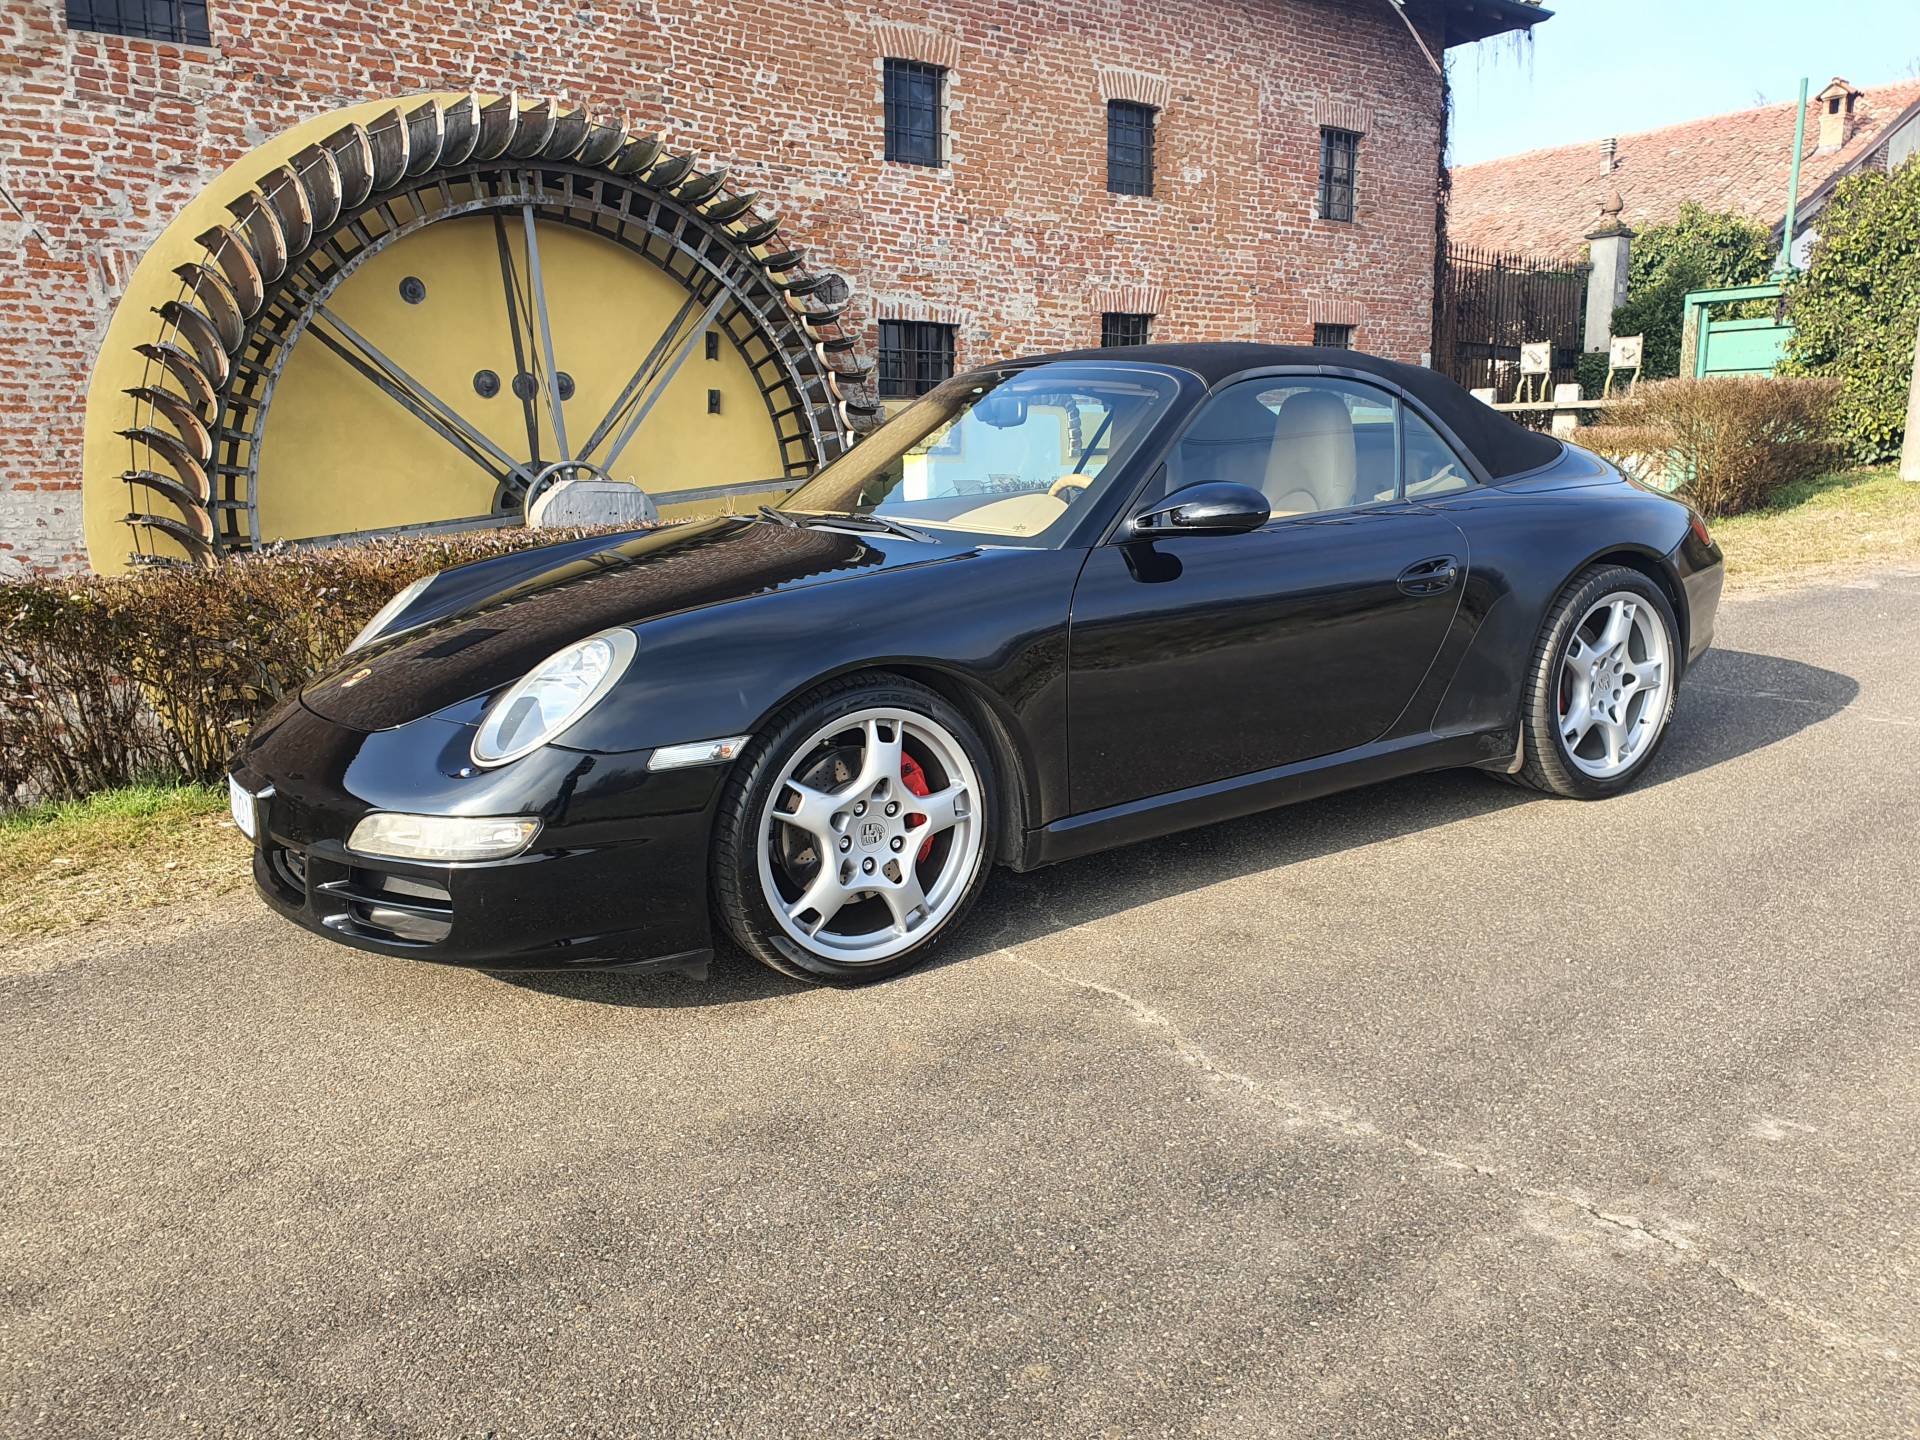 For Sale: Porsche 911 Carrera S (2005) offered for $97,709